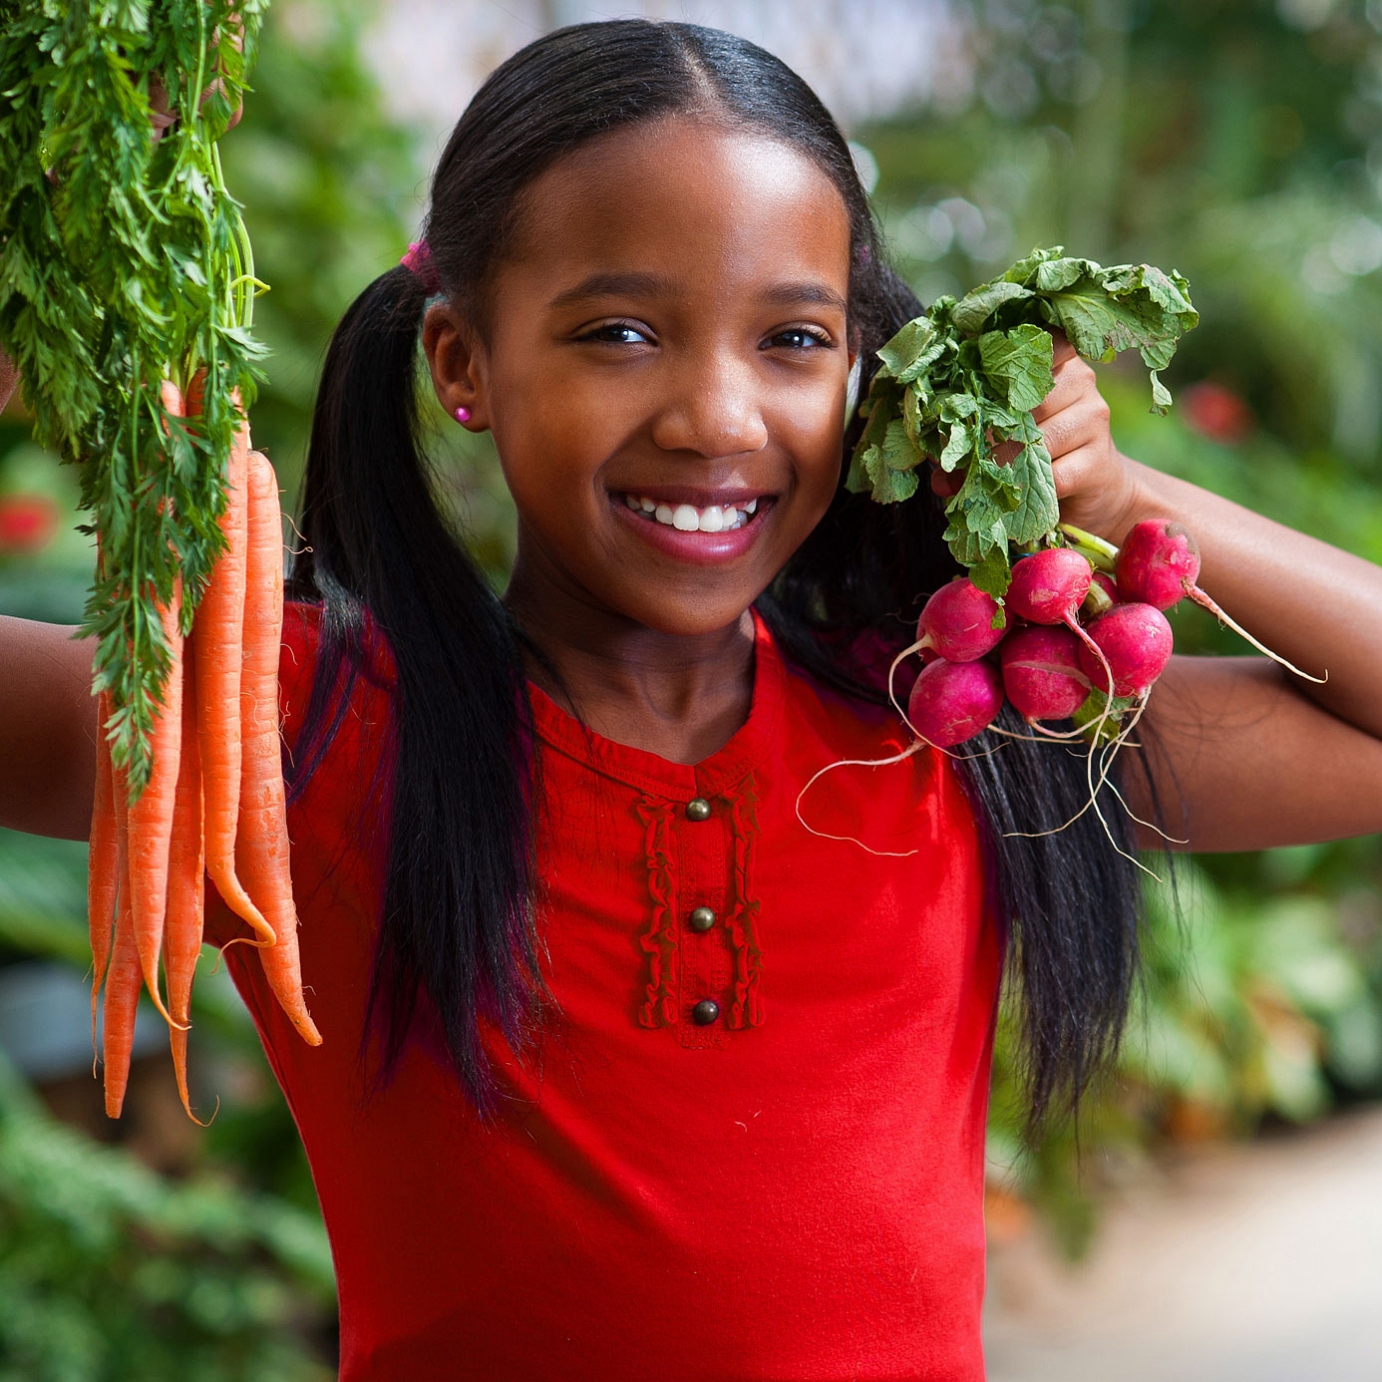 Girl holding carrots and radishes